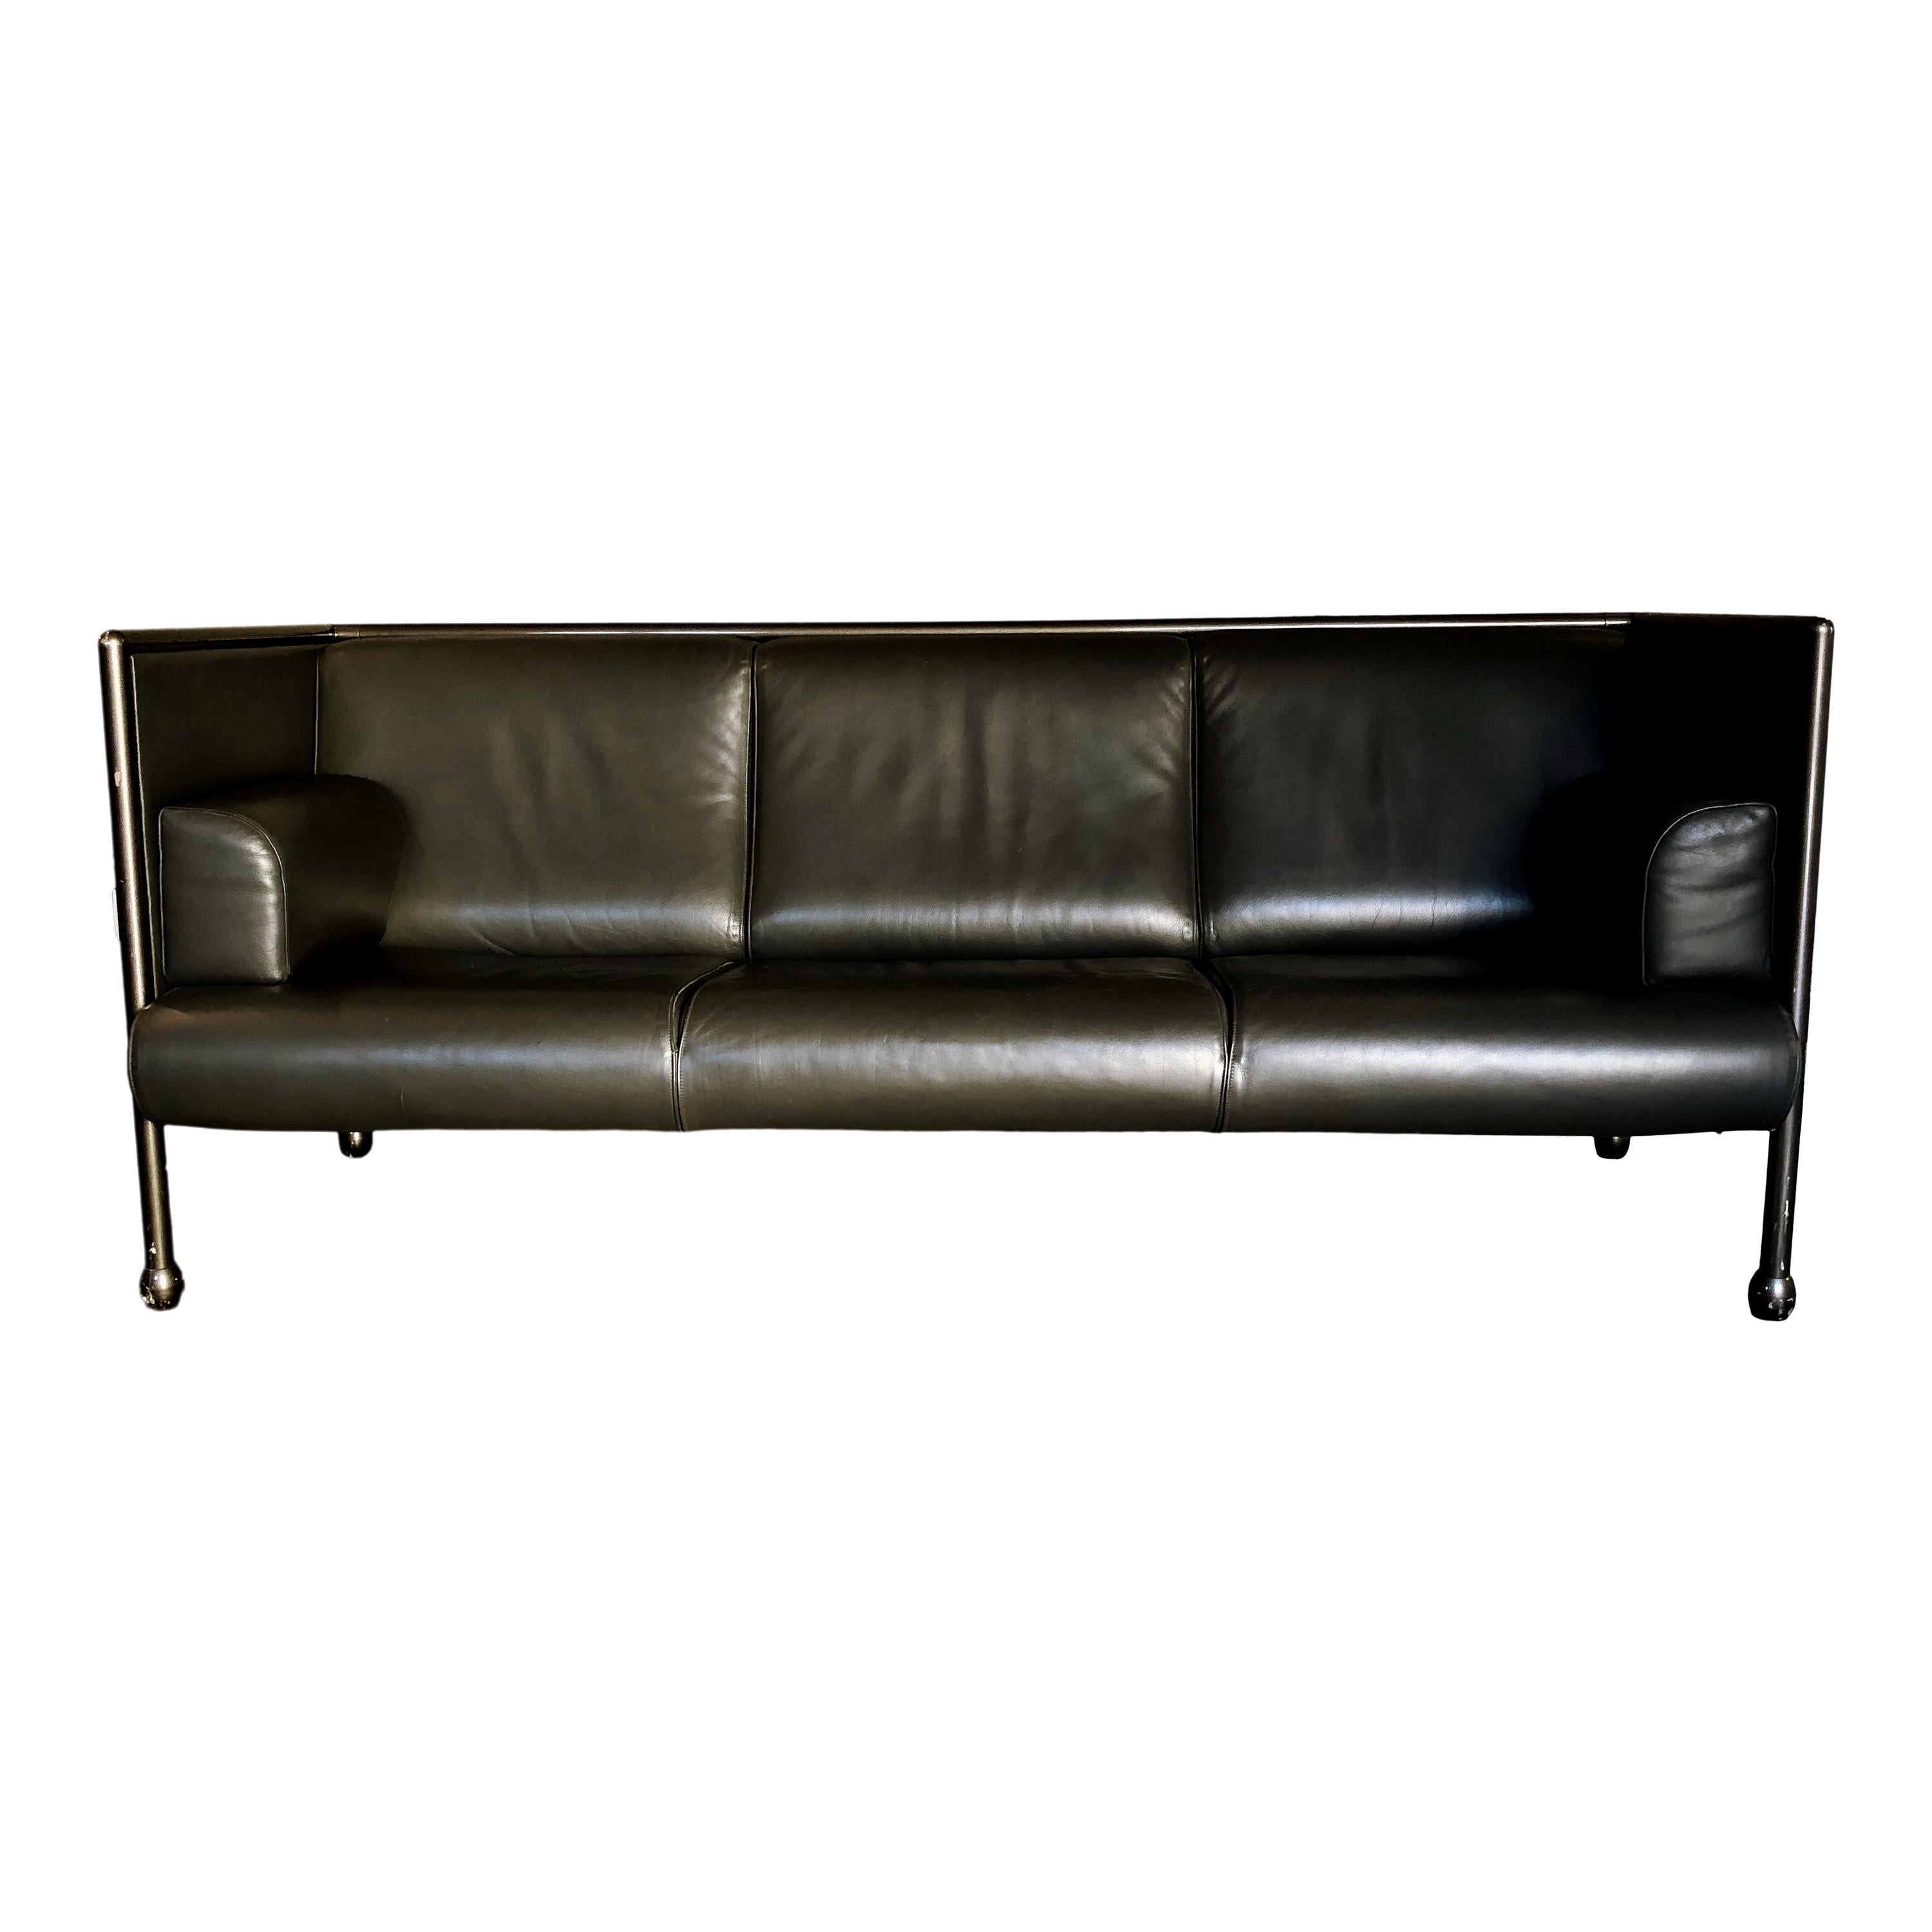 Ettore Sottsass Postmodern Iron and Black Leather Danube Sofa for Cassina, 1992 In Good Condition For Sale In Padova, IT